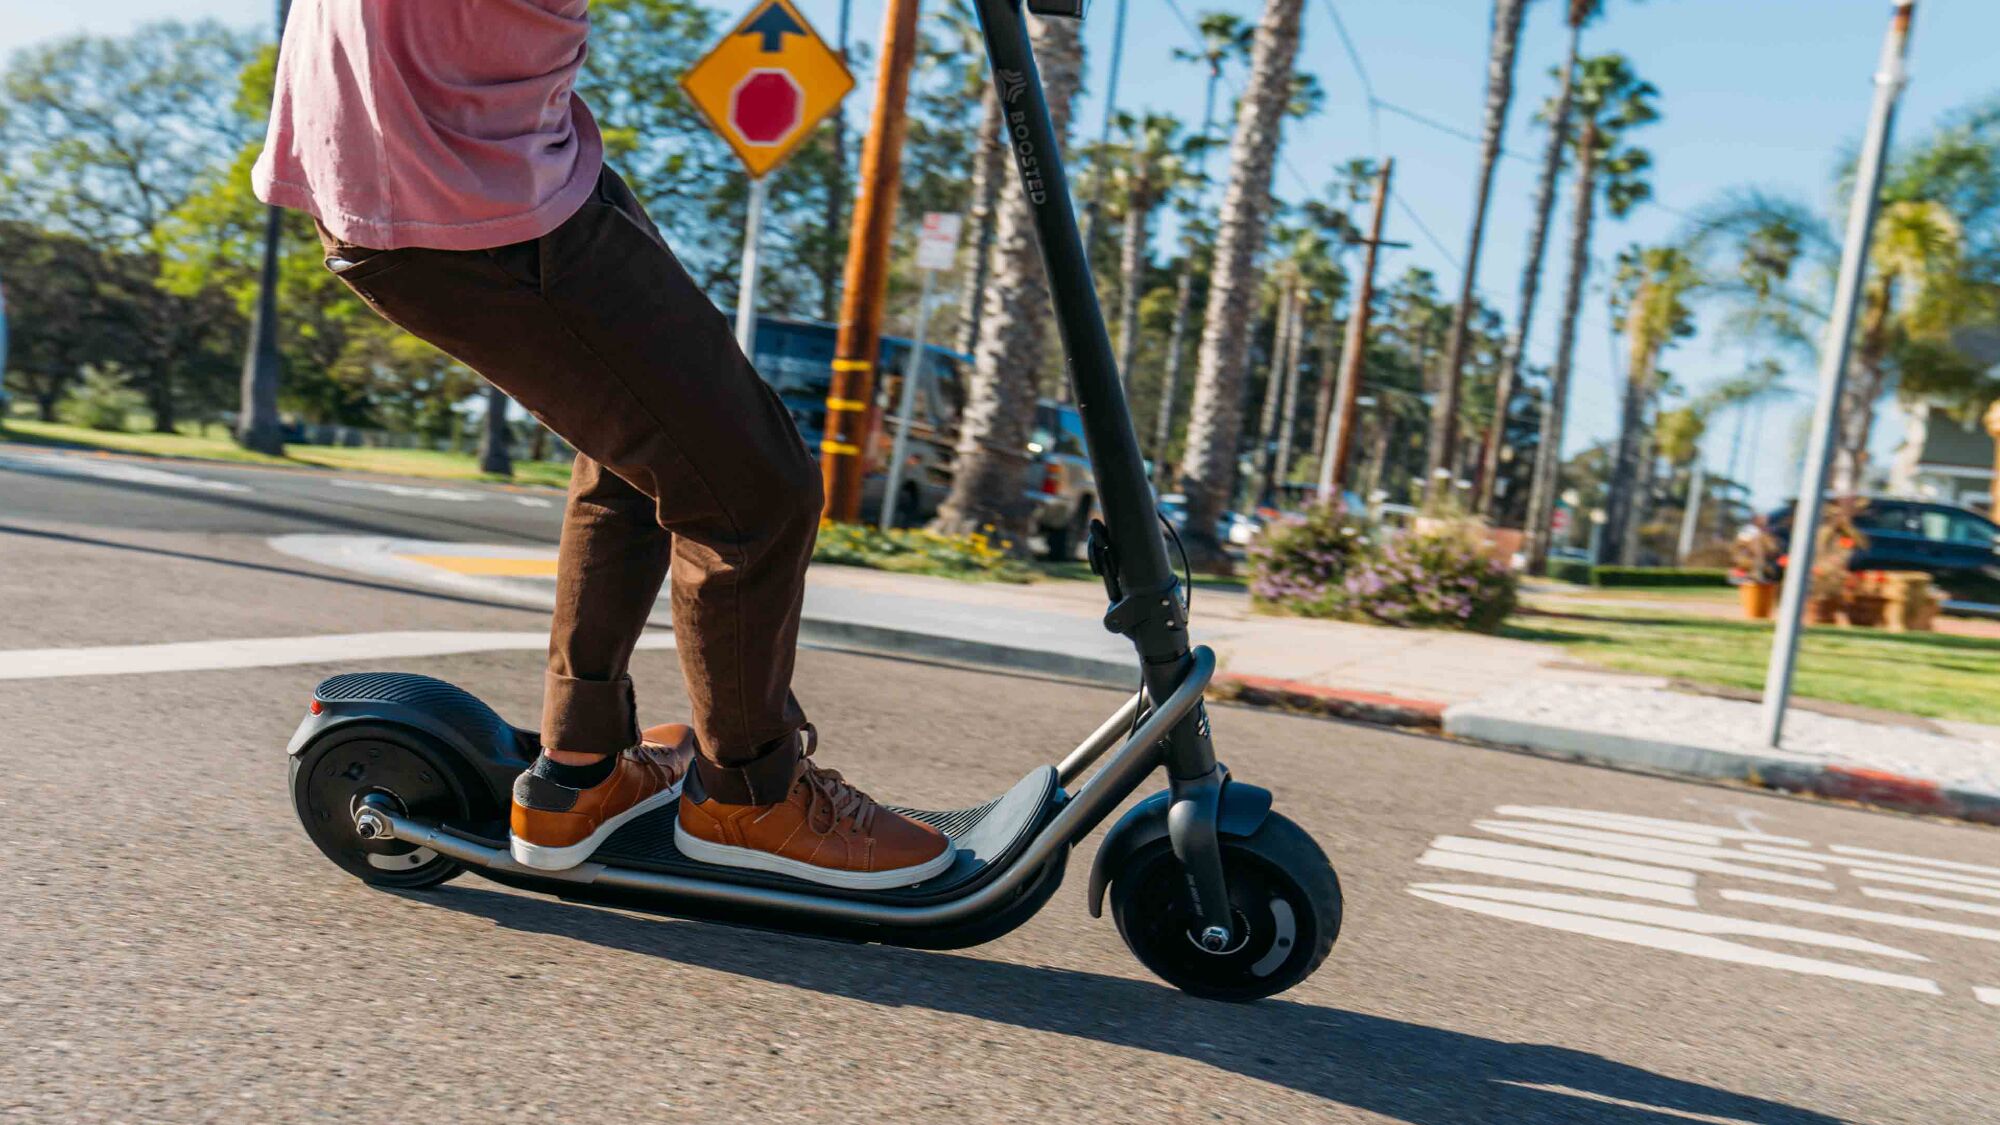 Praktisk Blitz bladre Boosted's electric scooter is fast, durable, fun and…really heavy |  TechCrunch